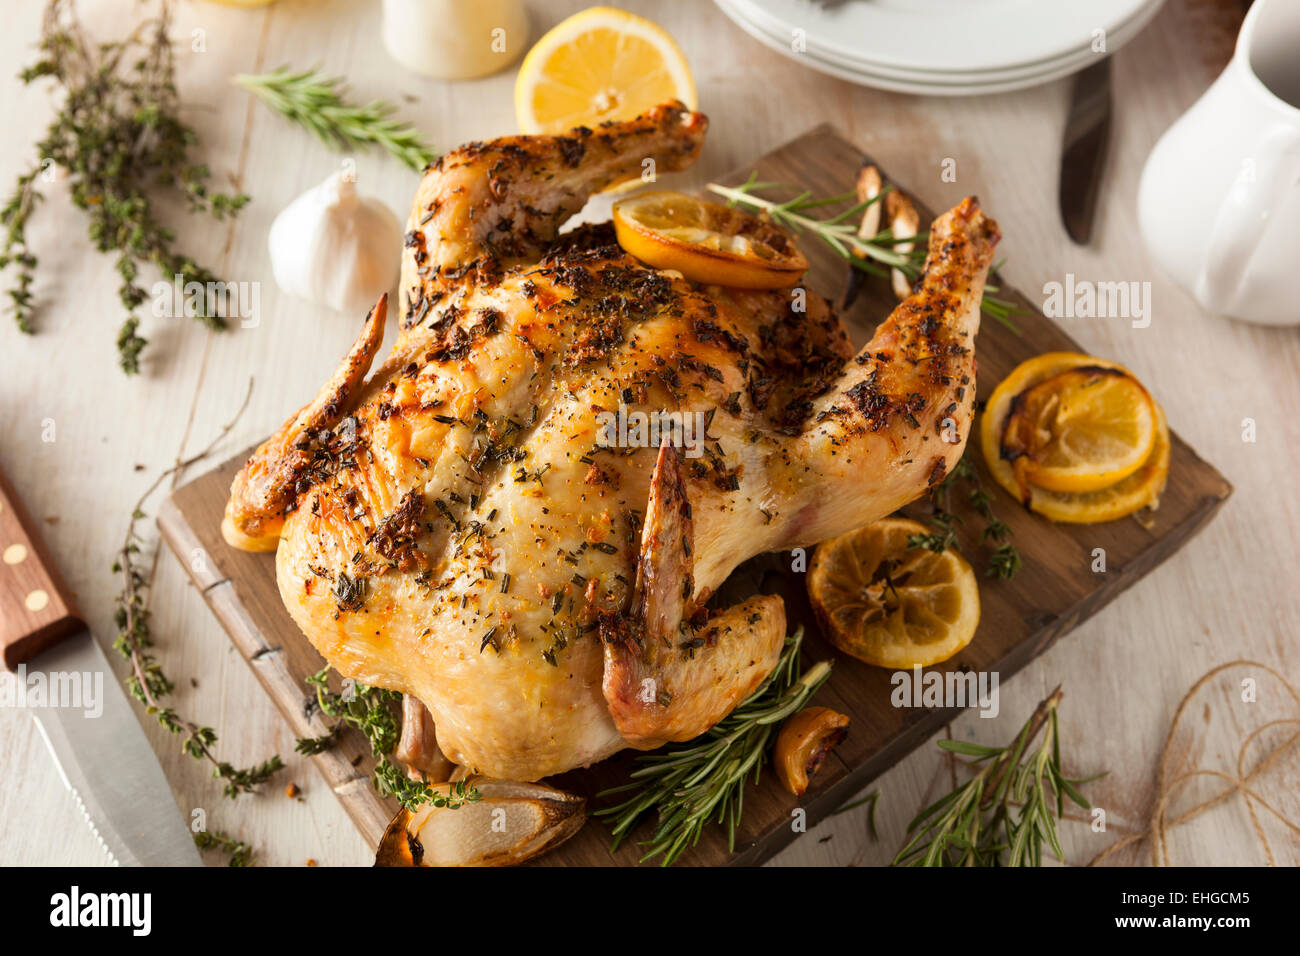 Homemade Lemon and Herb Whole Chicken on a Cutting Board Stock Photo